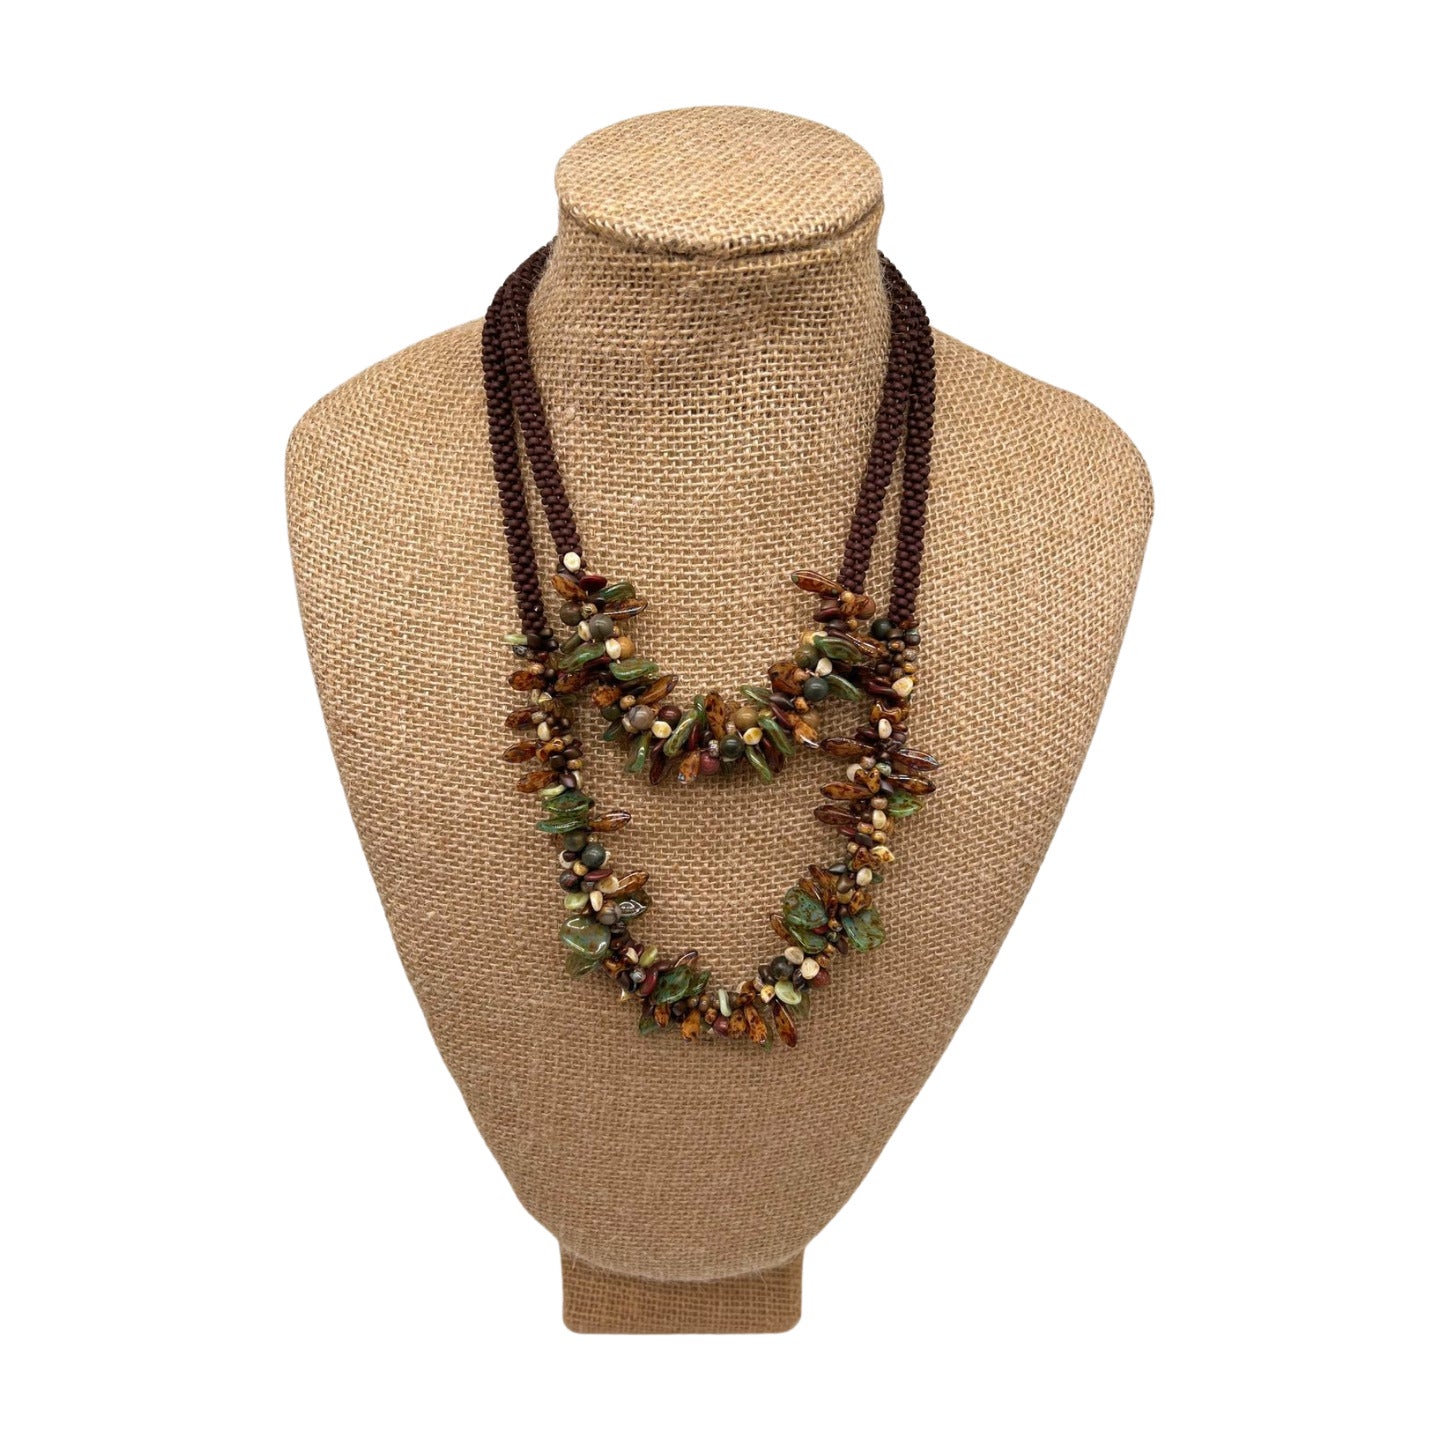 Pop-Up Mākeke - Akalei Designs - Mother & Daughter Two Necklace Set - Green & Brown Picasso Necklaces